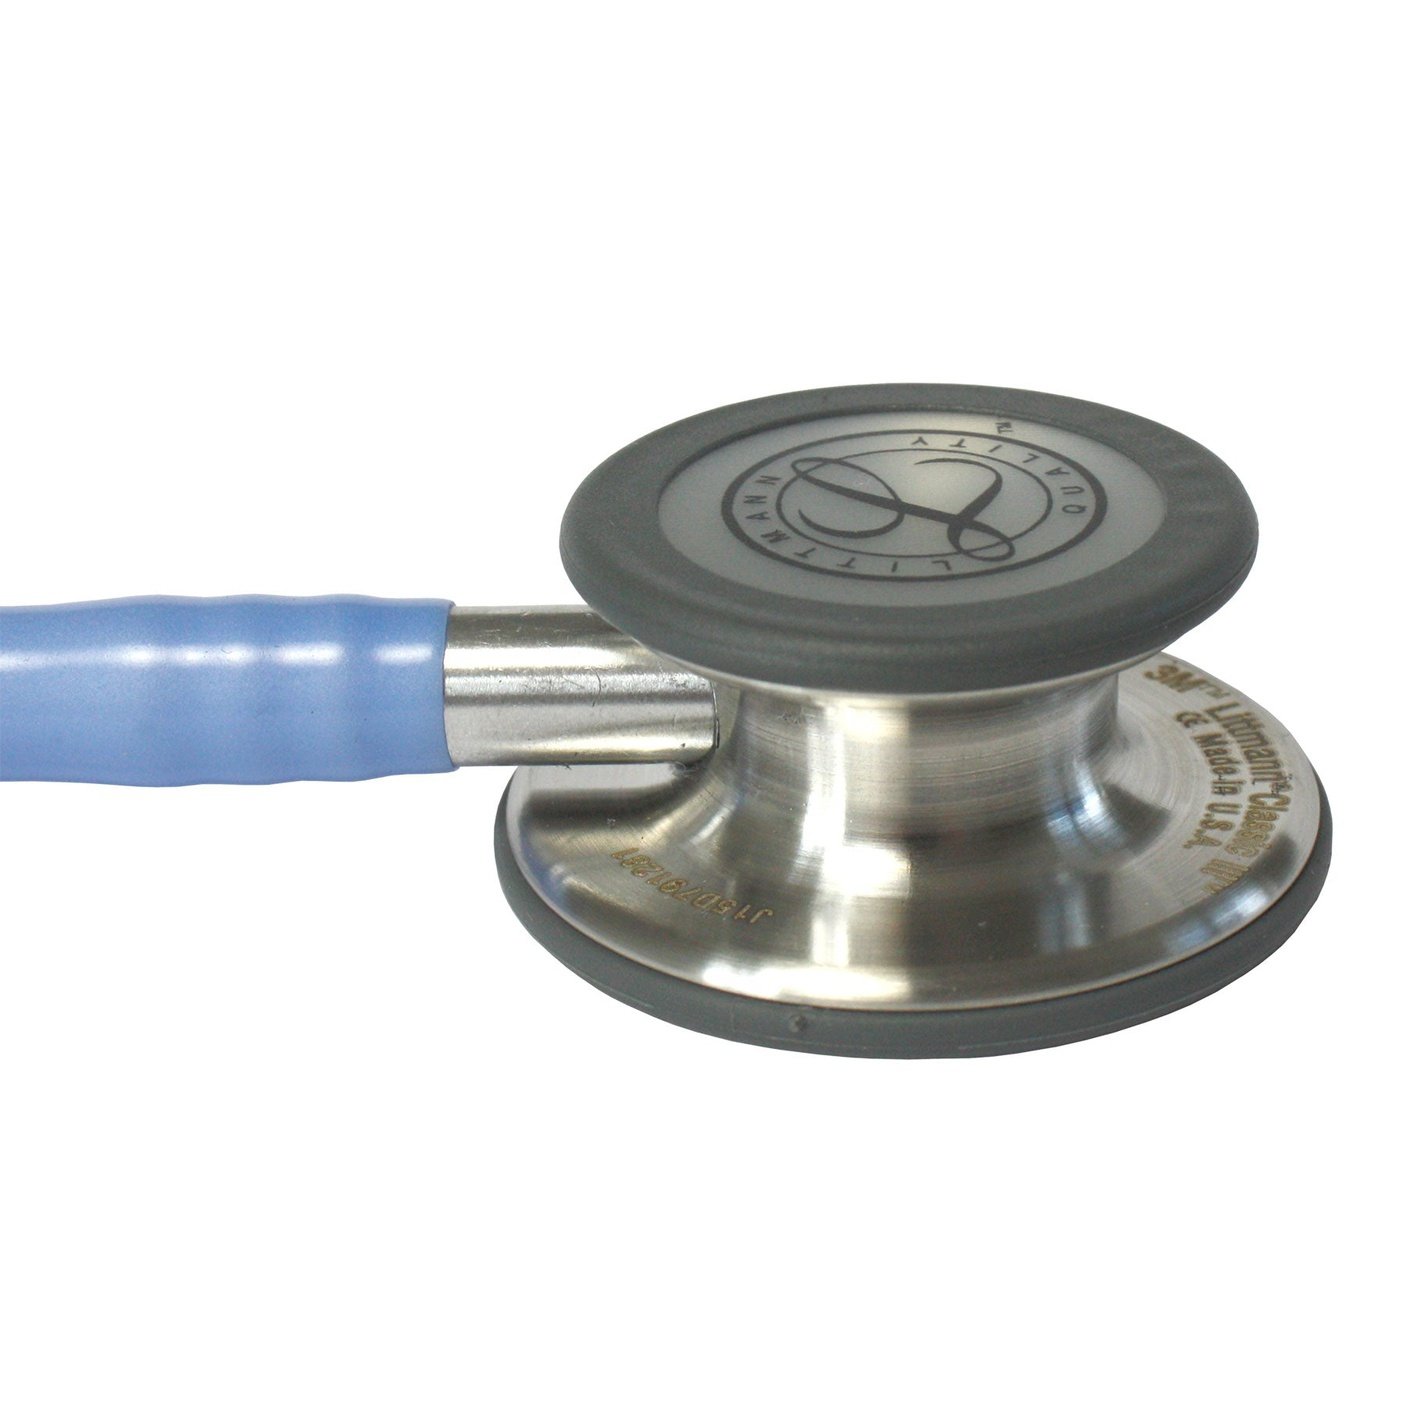 What is the best way to remove kinks from my stethoscope tubing? -  Ultrascope